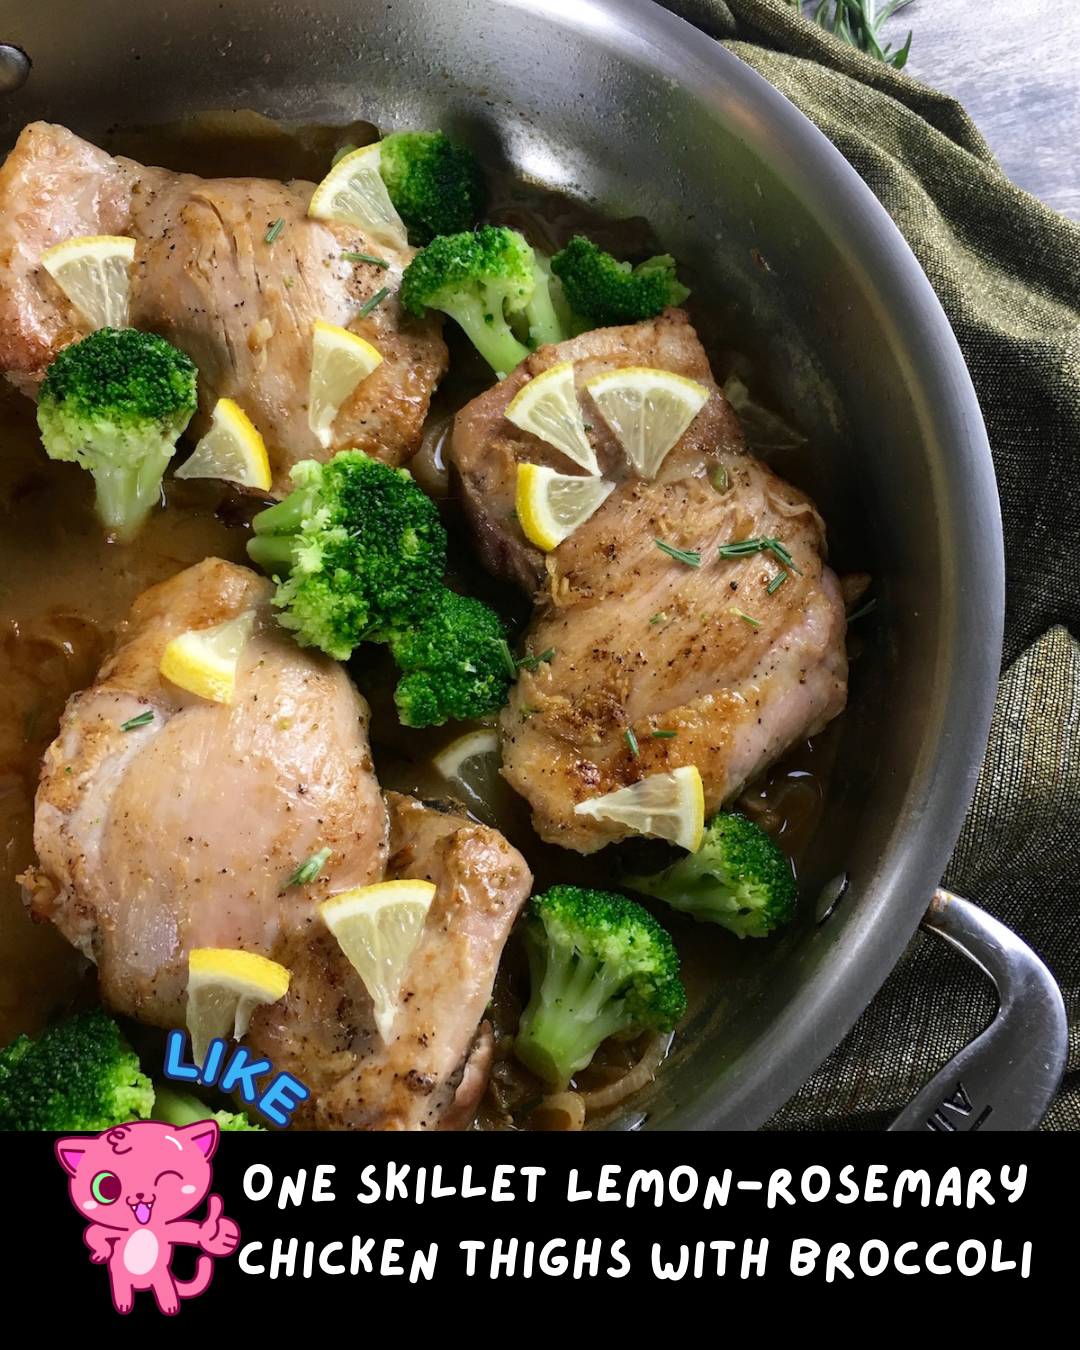 🍋🍗 Make dinner easier tonight with this recipe for One Skillet Lemon-Rosemary Chicken Thighs with Broccoli! Bursting with bright flavors and perfectly cooked in one pan for an easy and delicious meal. 🥘😋